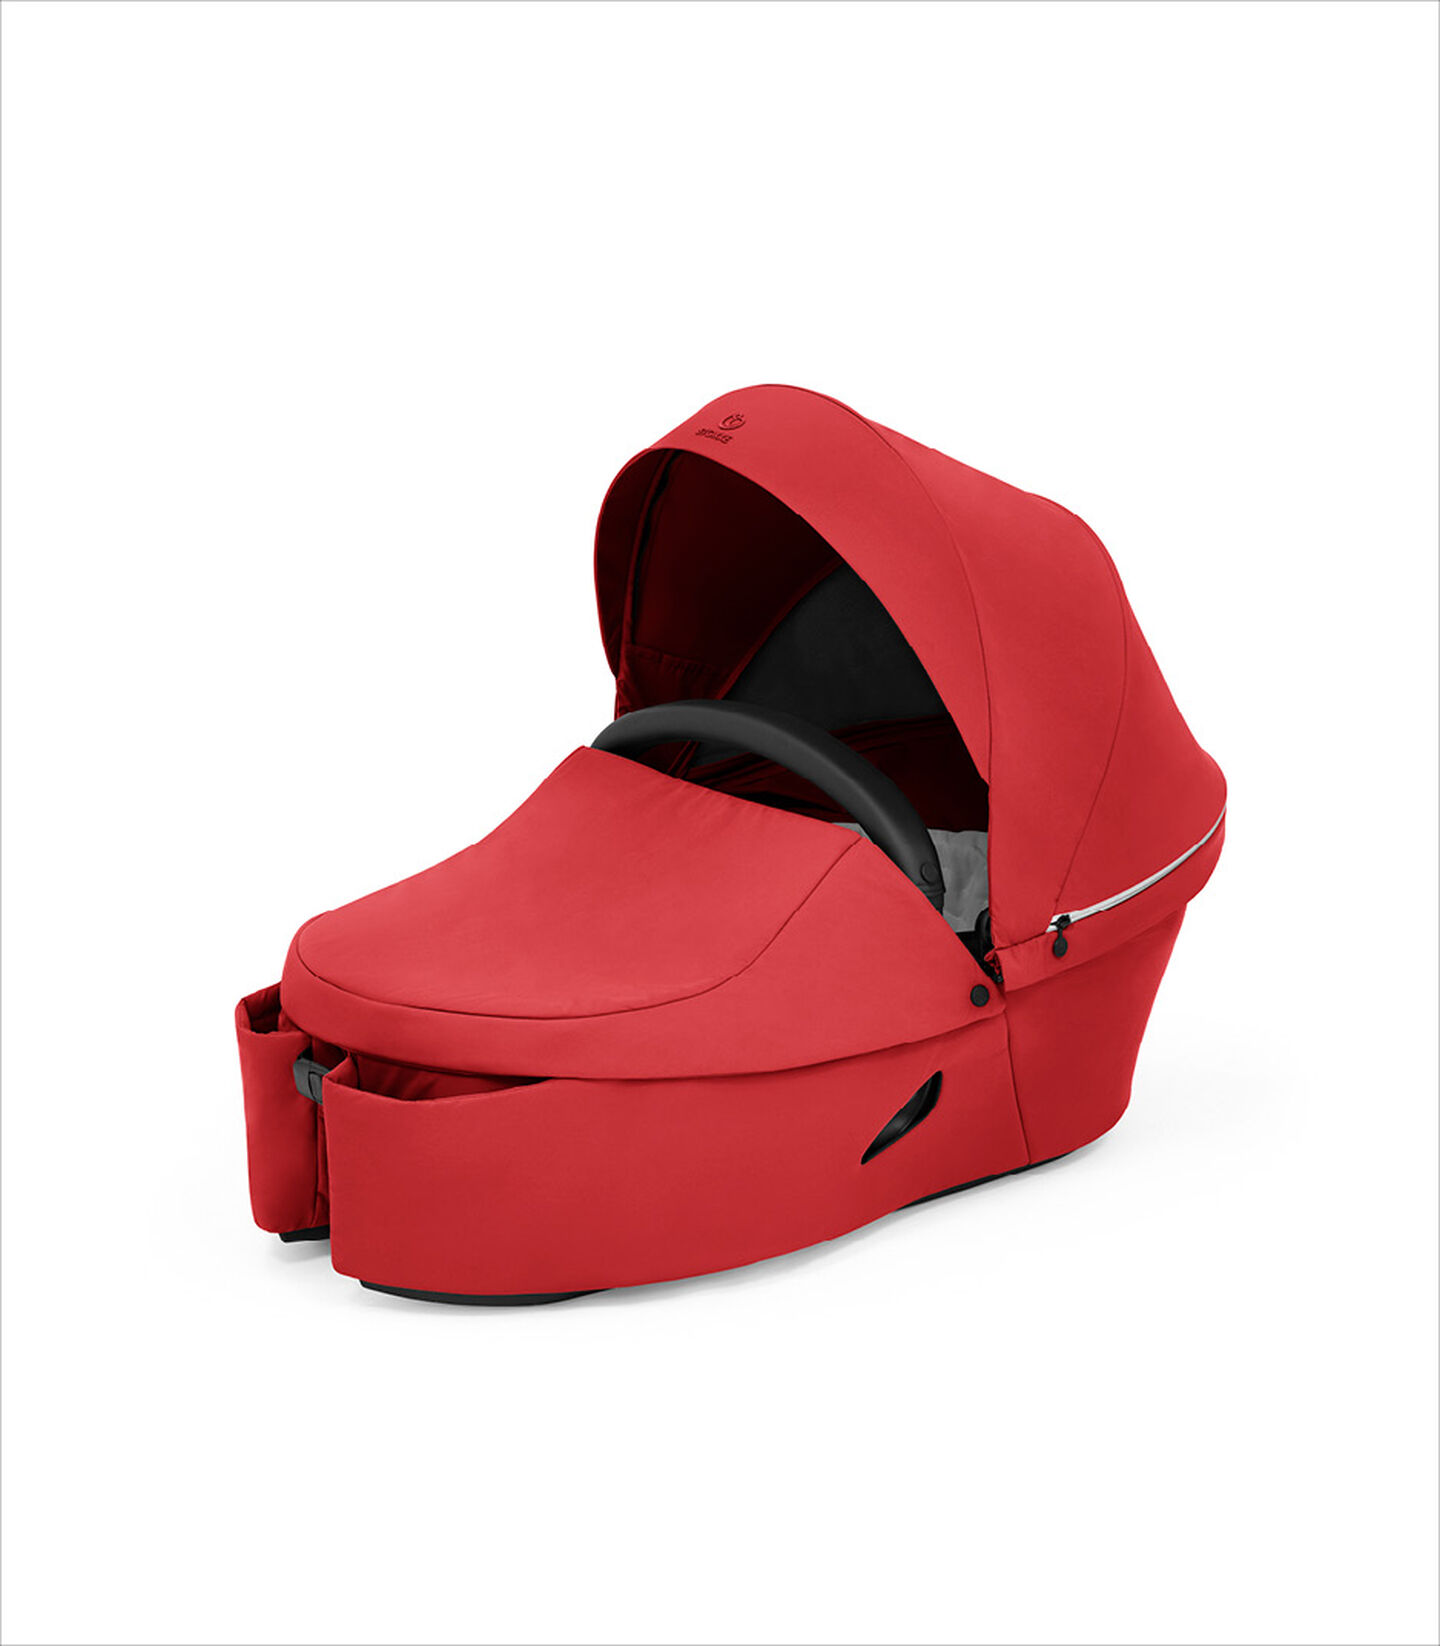 Stokke® Xplory® X Babyschale Ruby Red, Ruby Red, mainview view 6